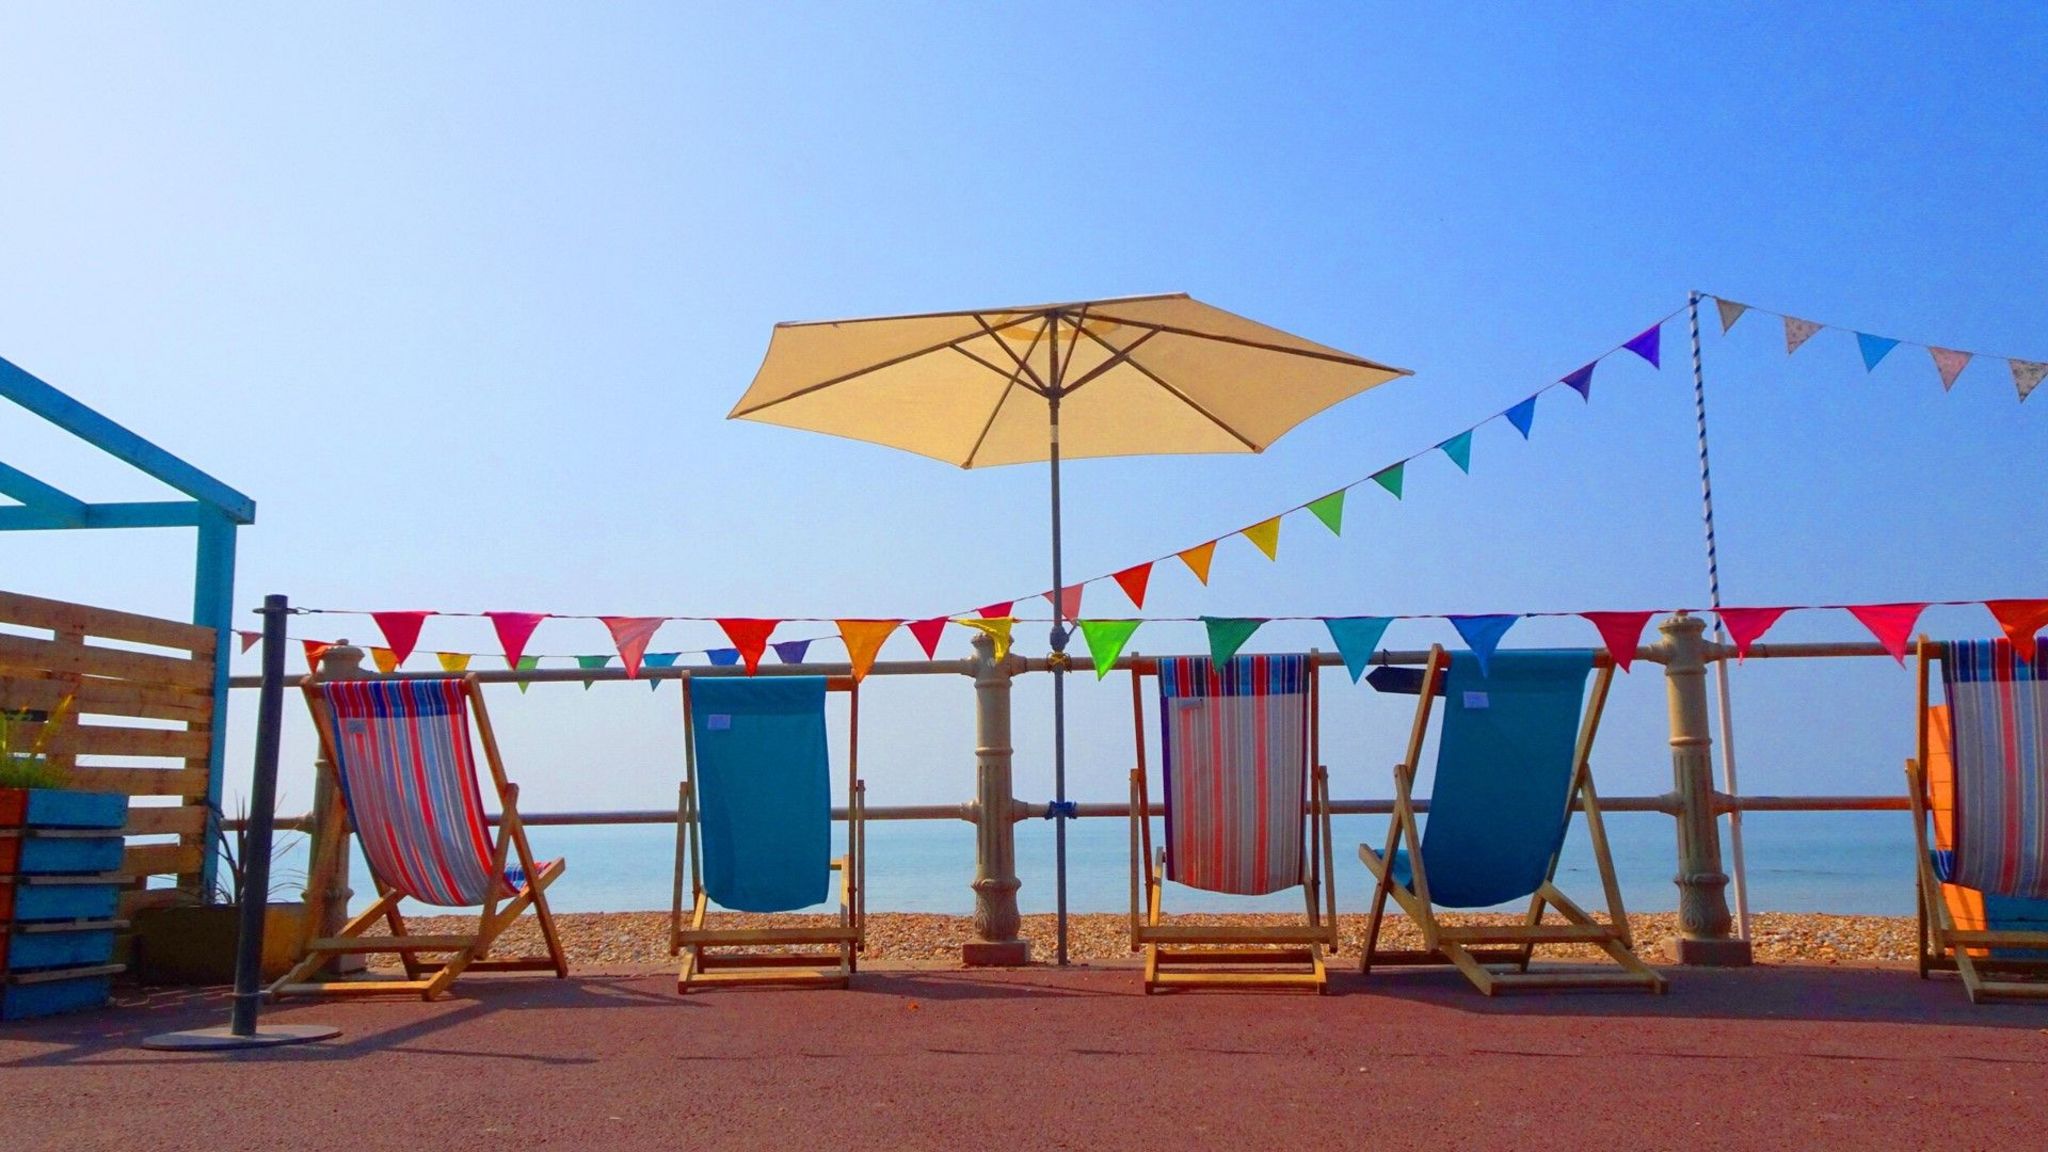 Deckchairs, bunting and a parasol on a seafront with a bright blue sky overhead